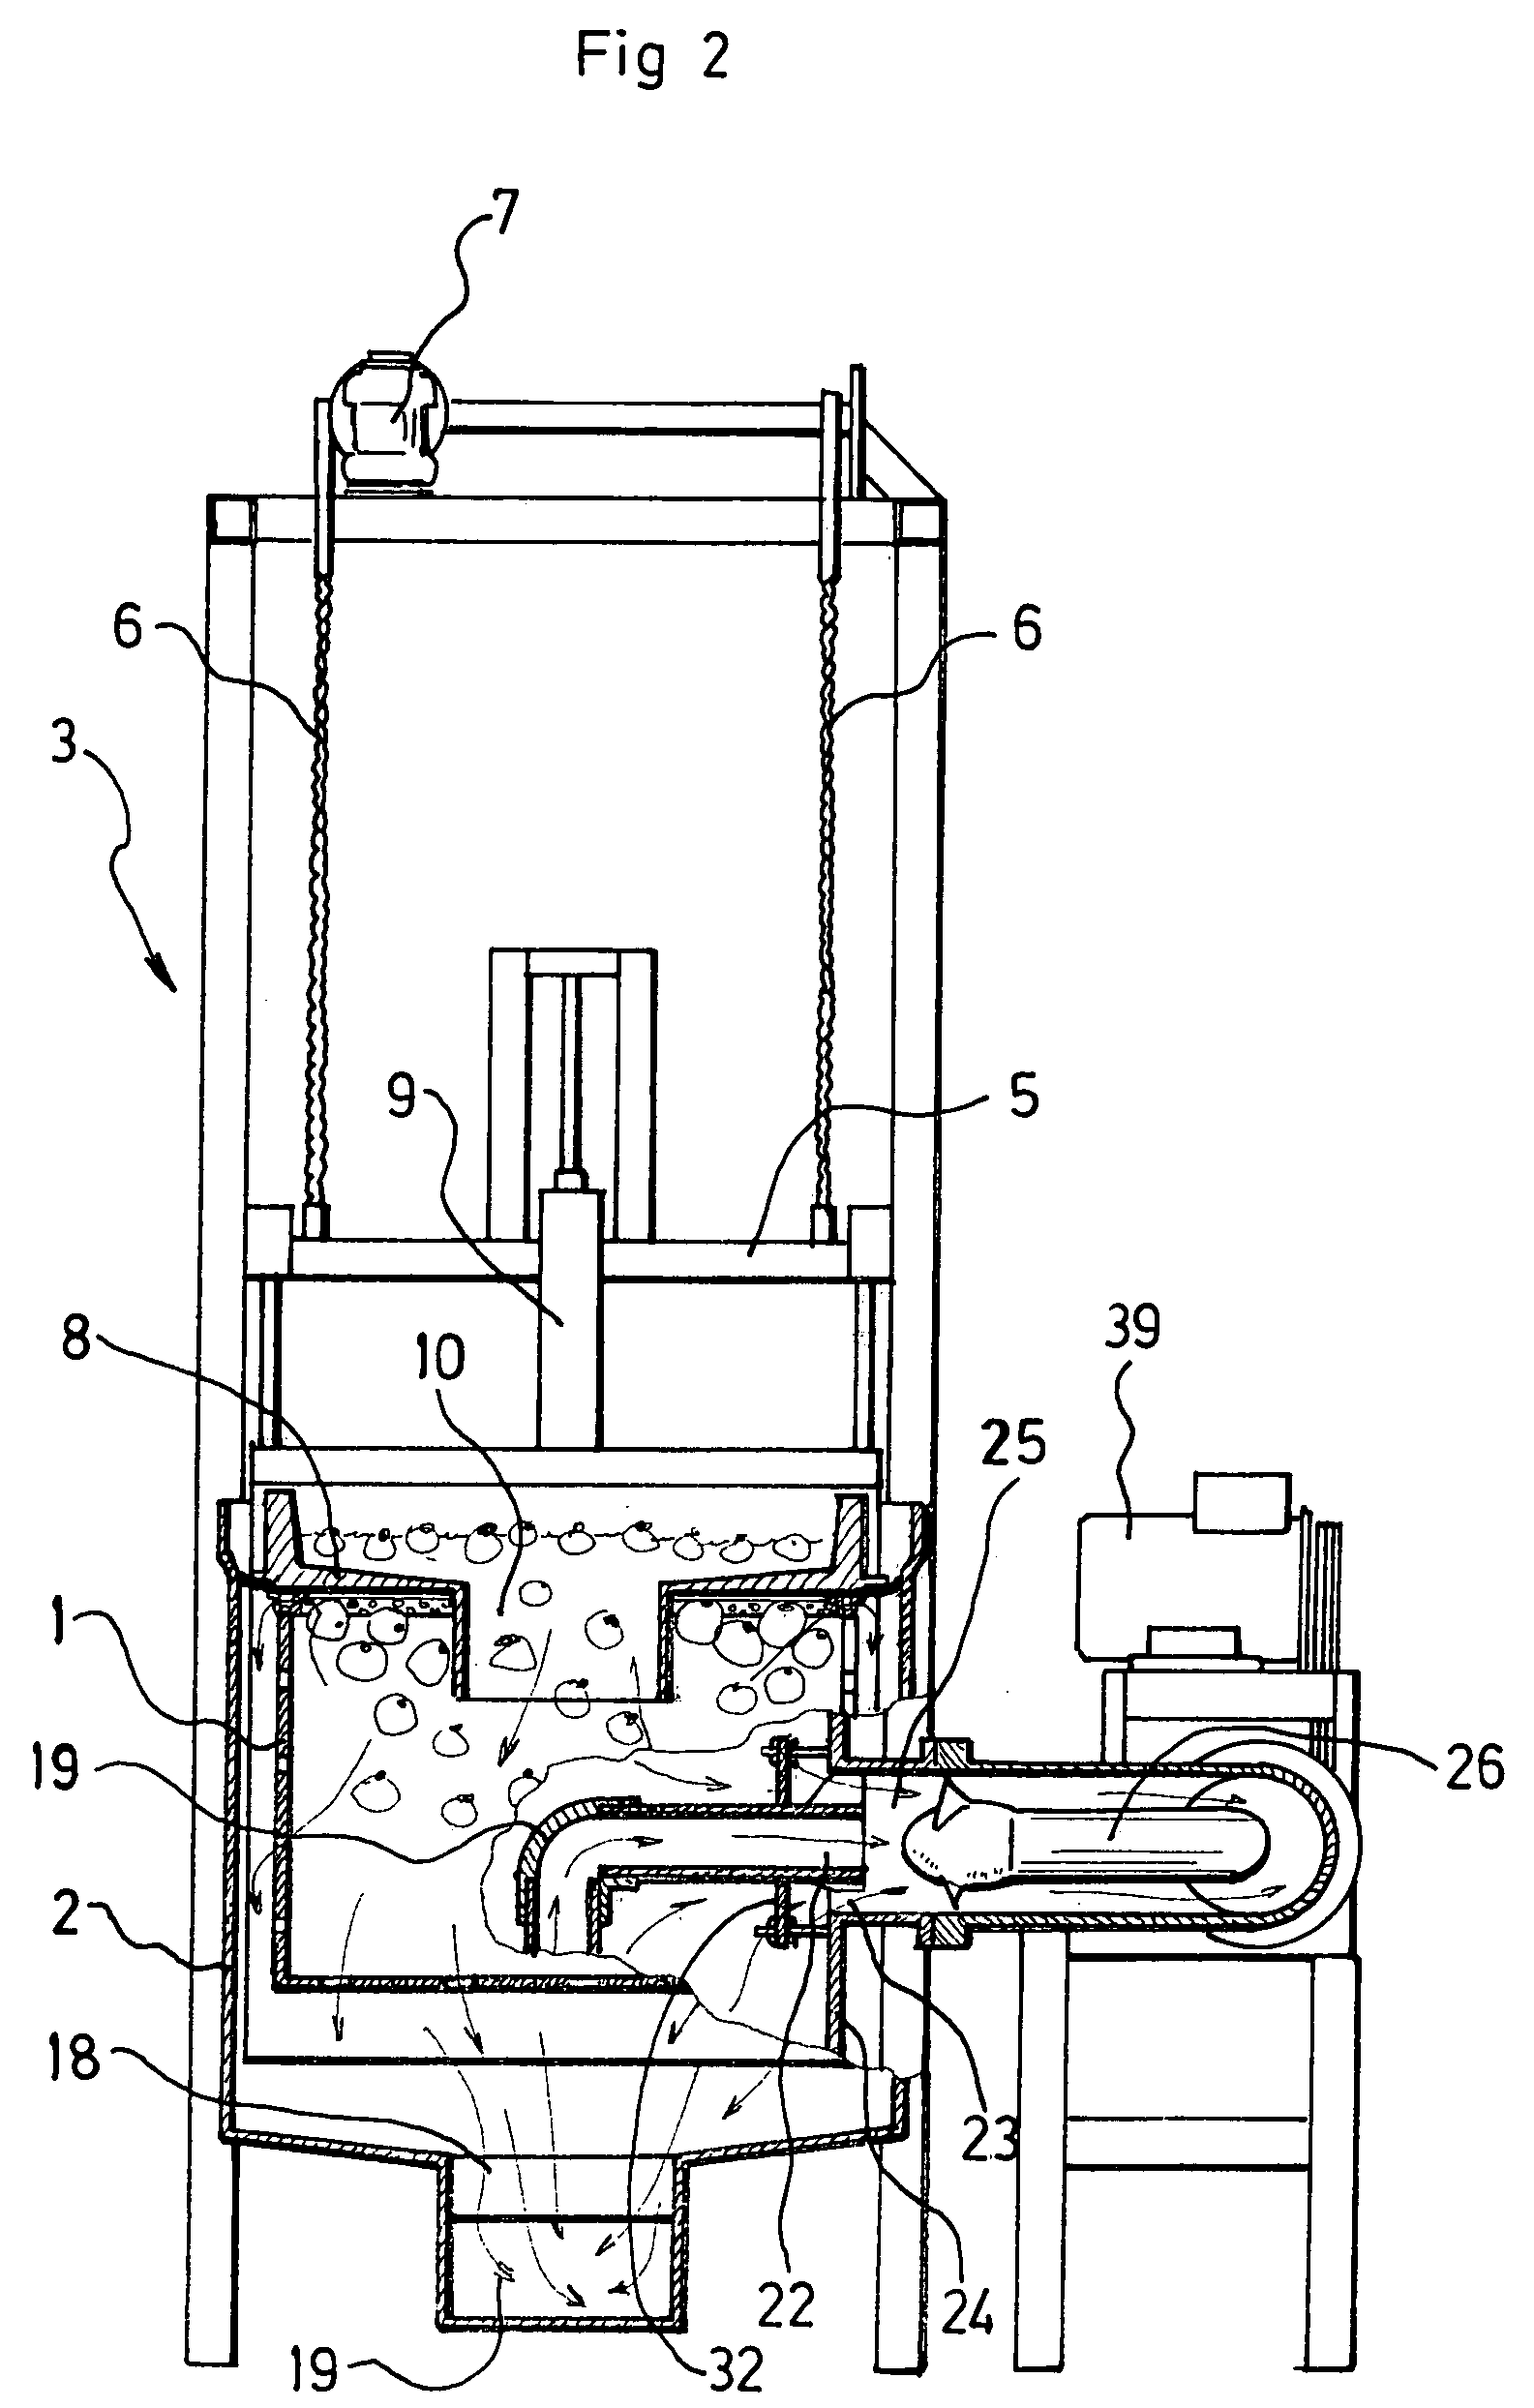 Installation for hydraulically filling crates with floating objects such as fruits and having a single double-acting pump